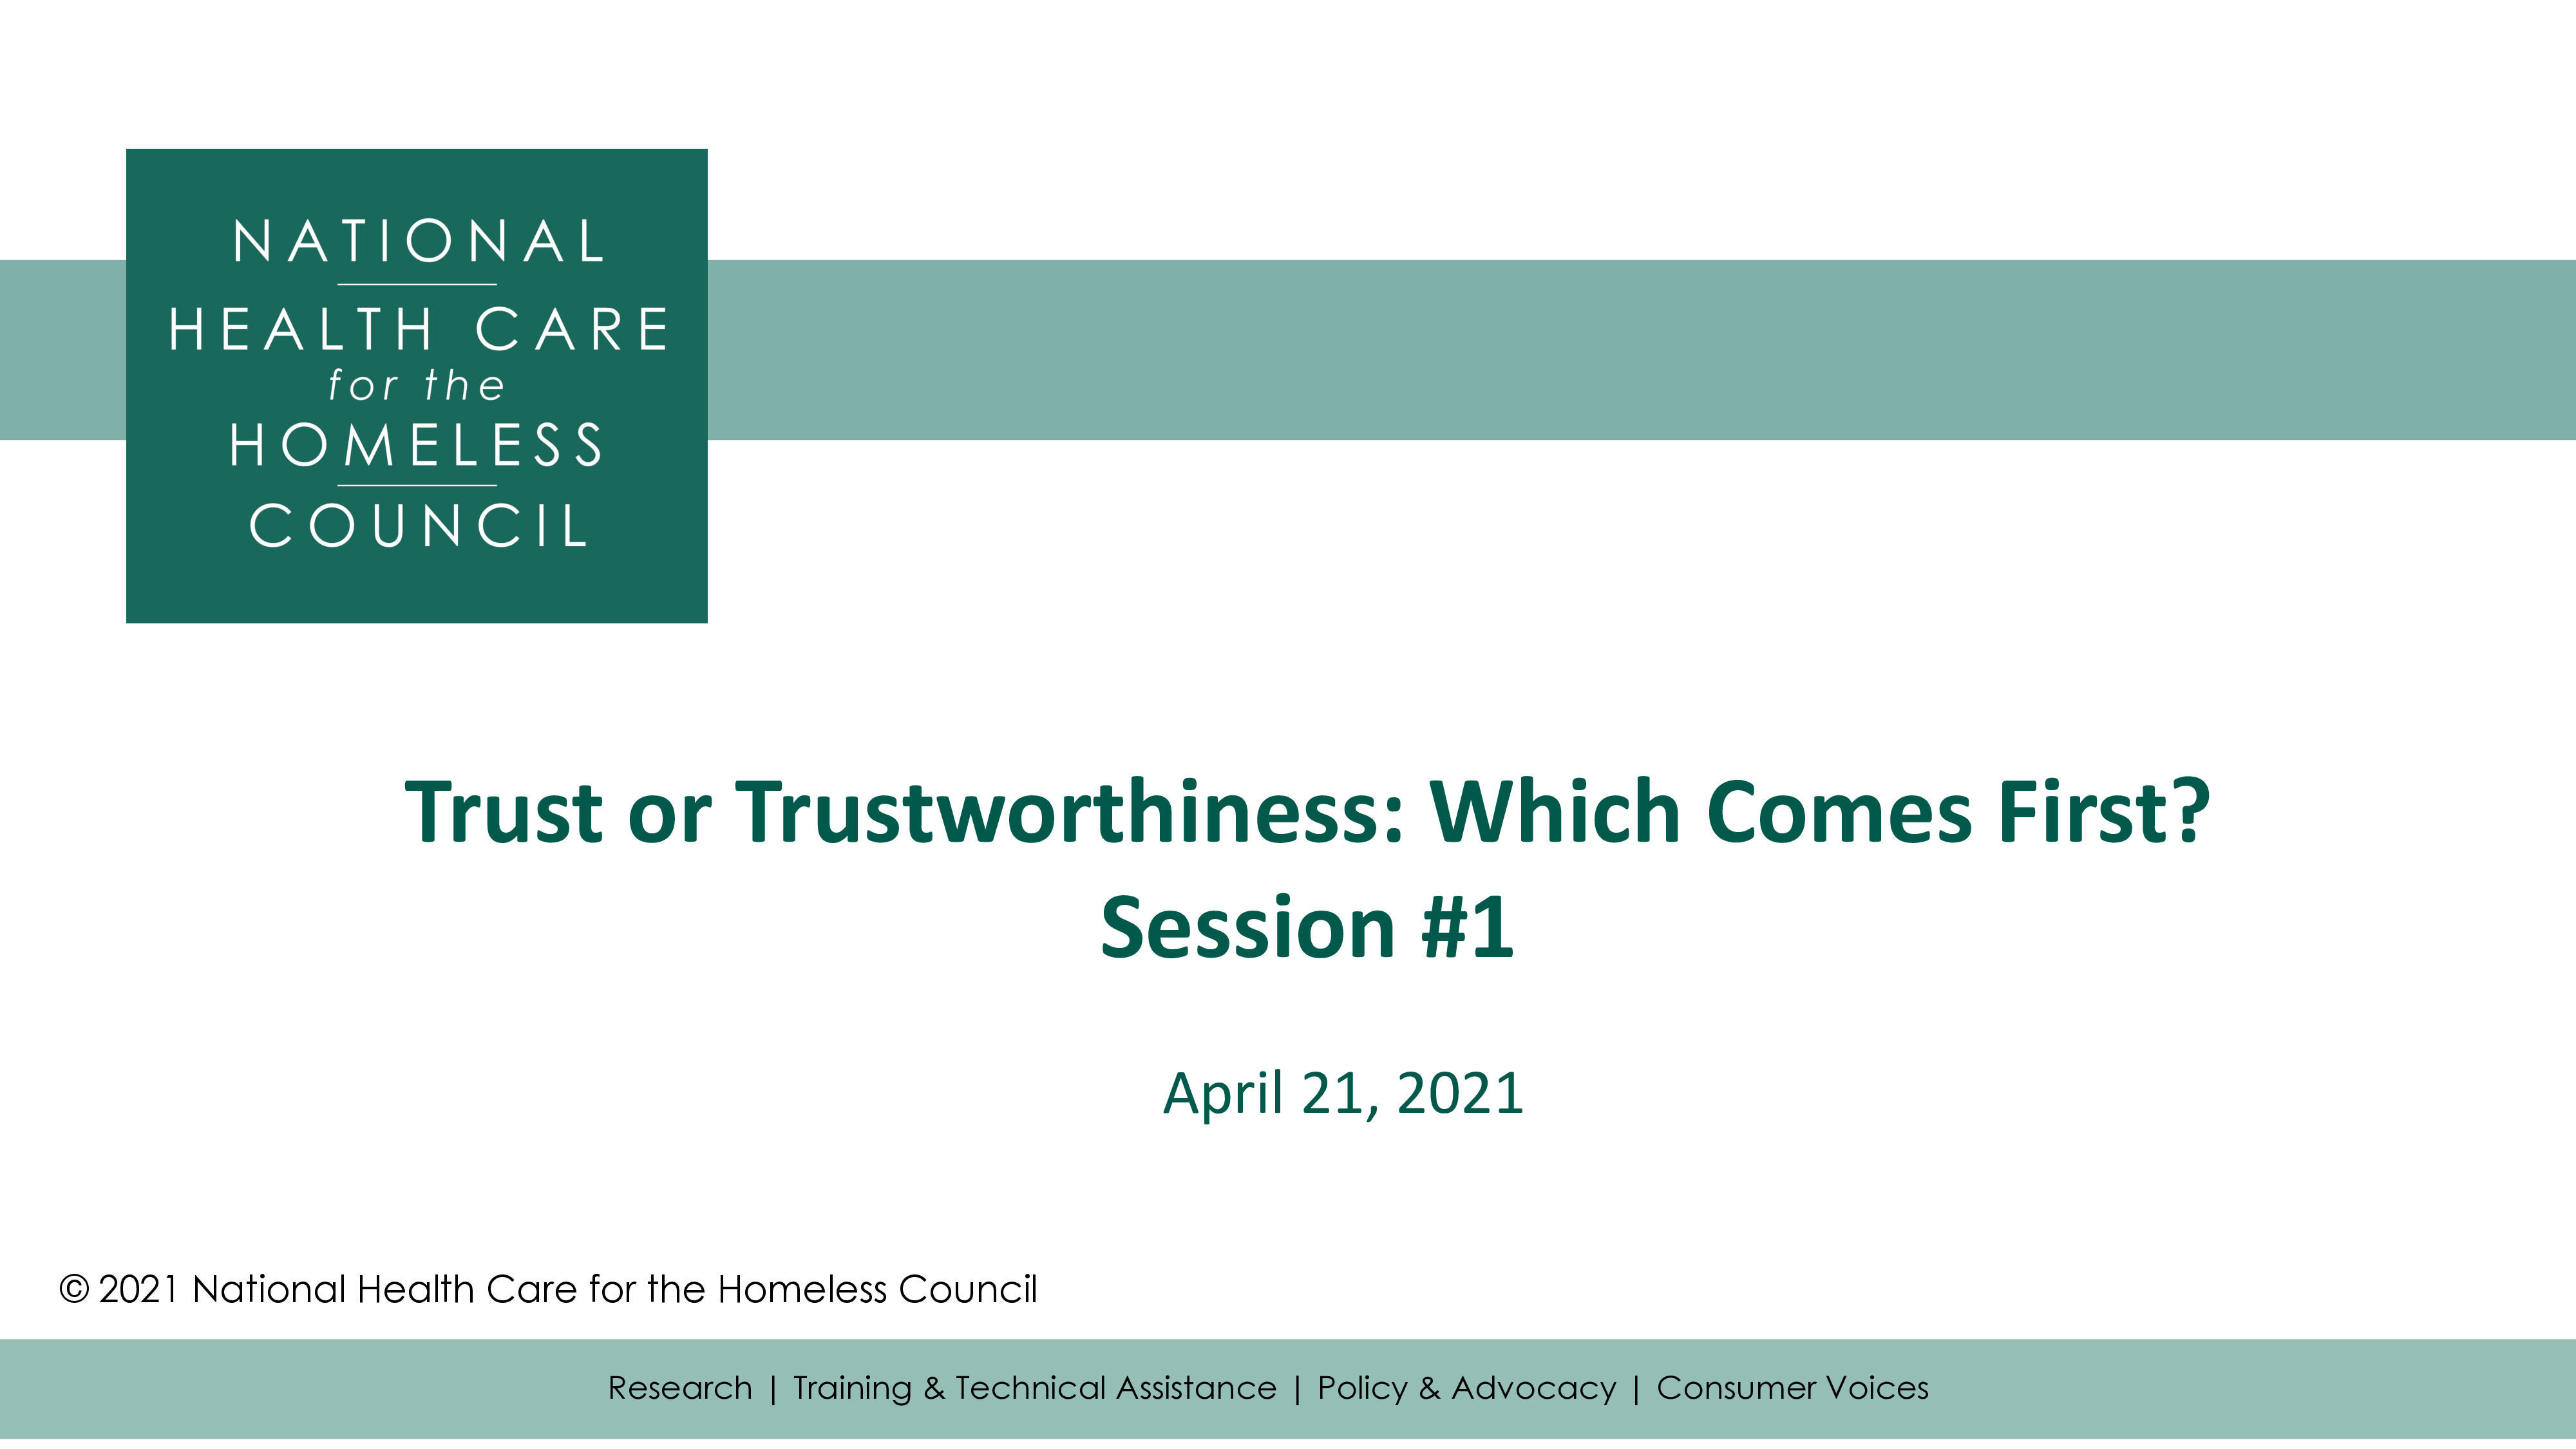 Title page of slides for "Trust or Trustworthiness: Which Comes First? Session #1 held on April 21, 2021